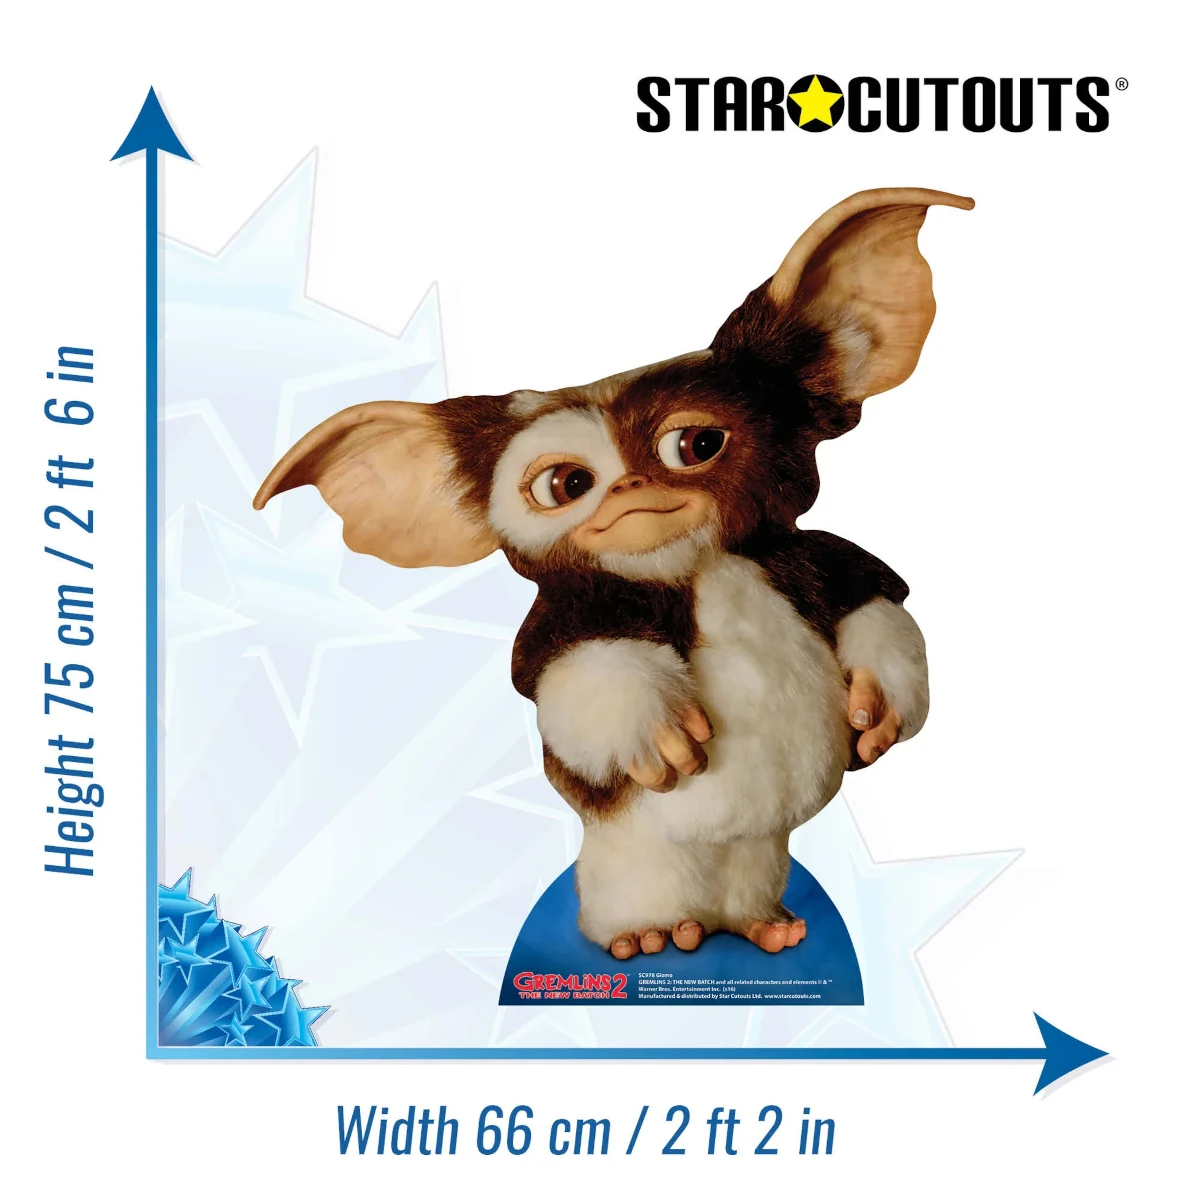 SC978 Gizmo (Gremlins 2) Official Lifesize Cardboard Cutout Standee Size